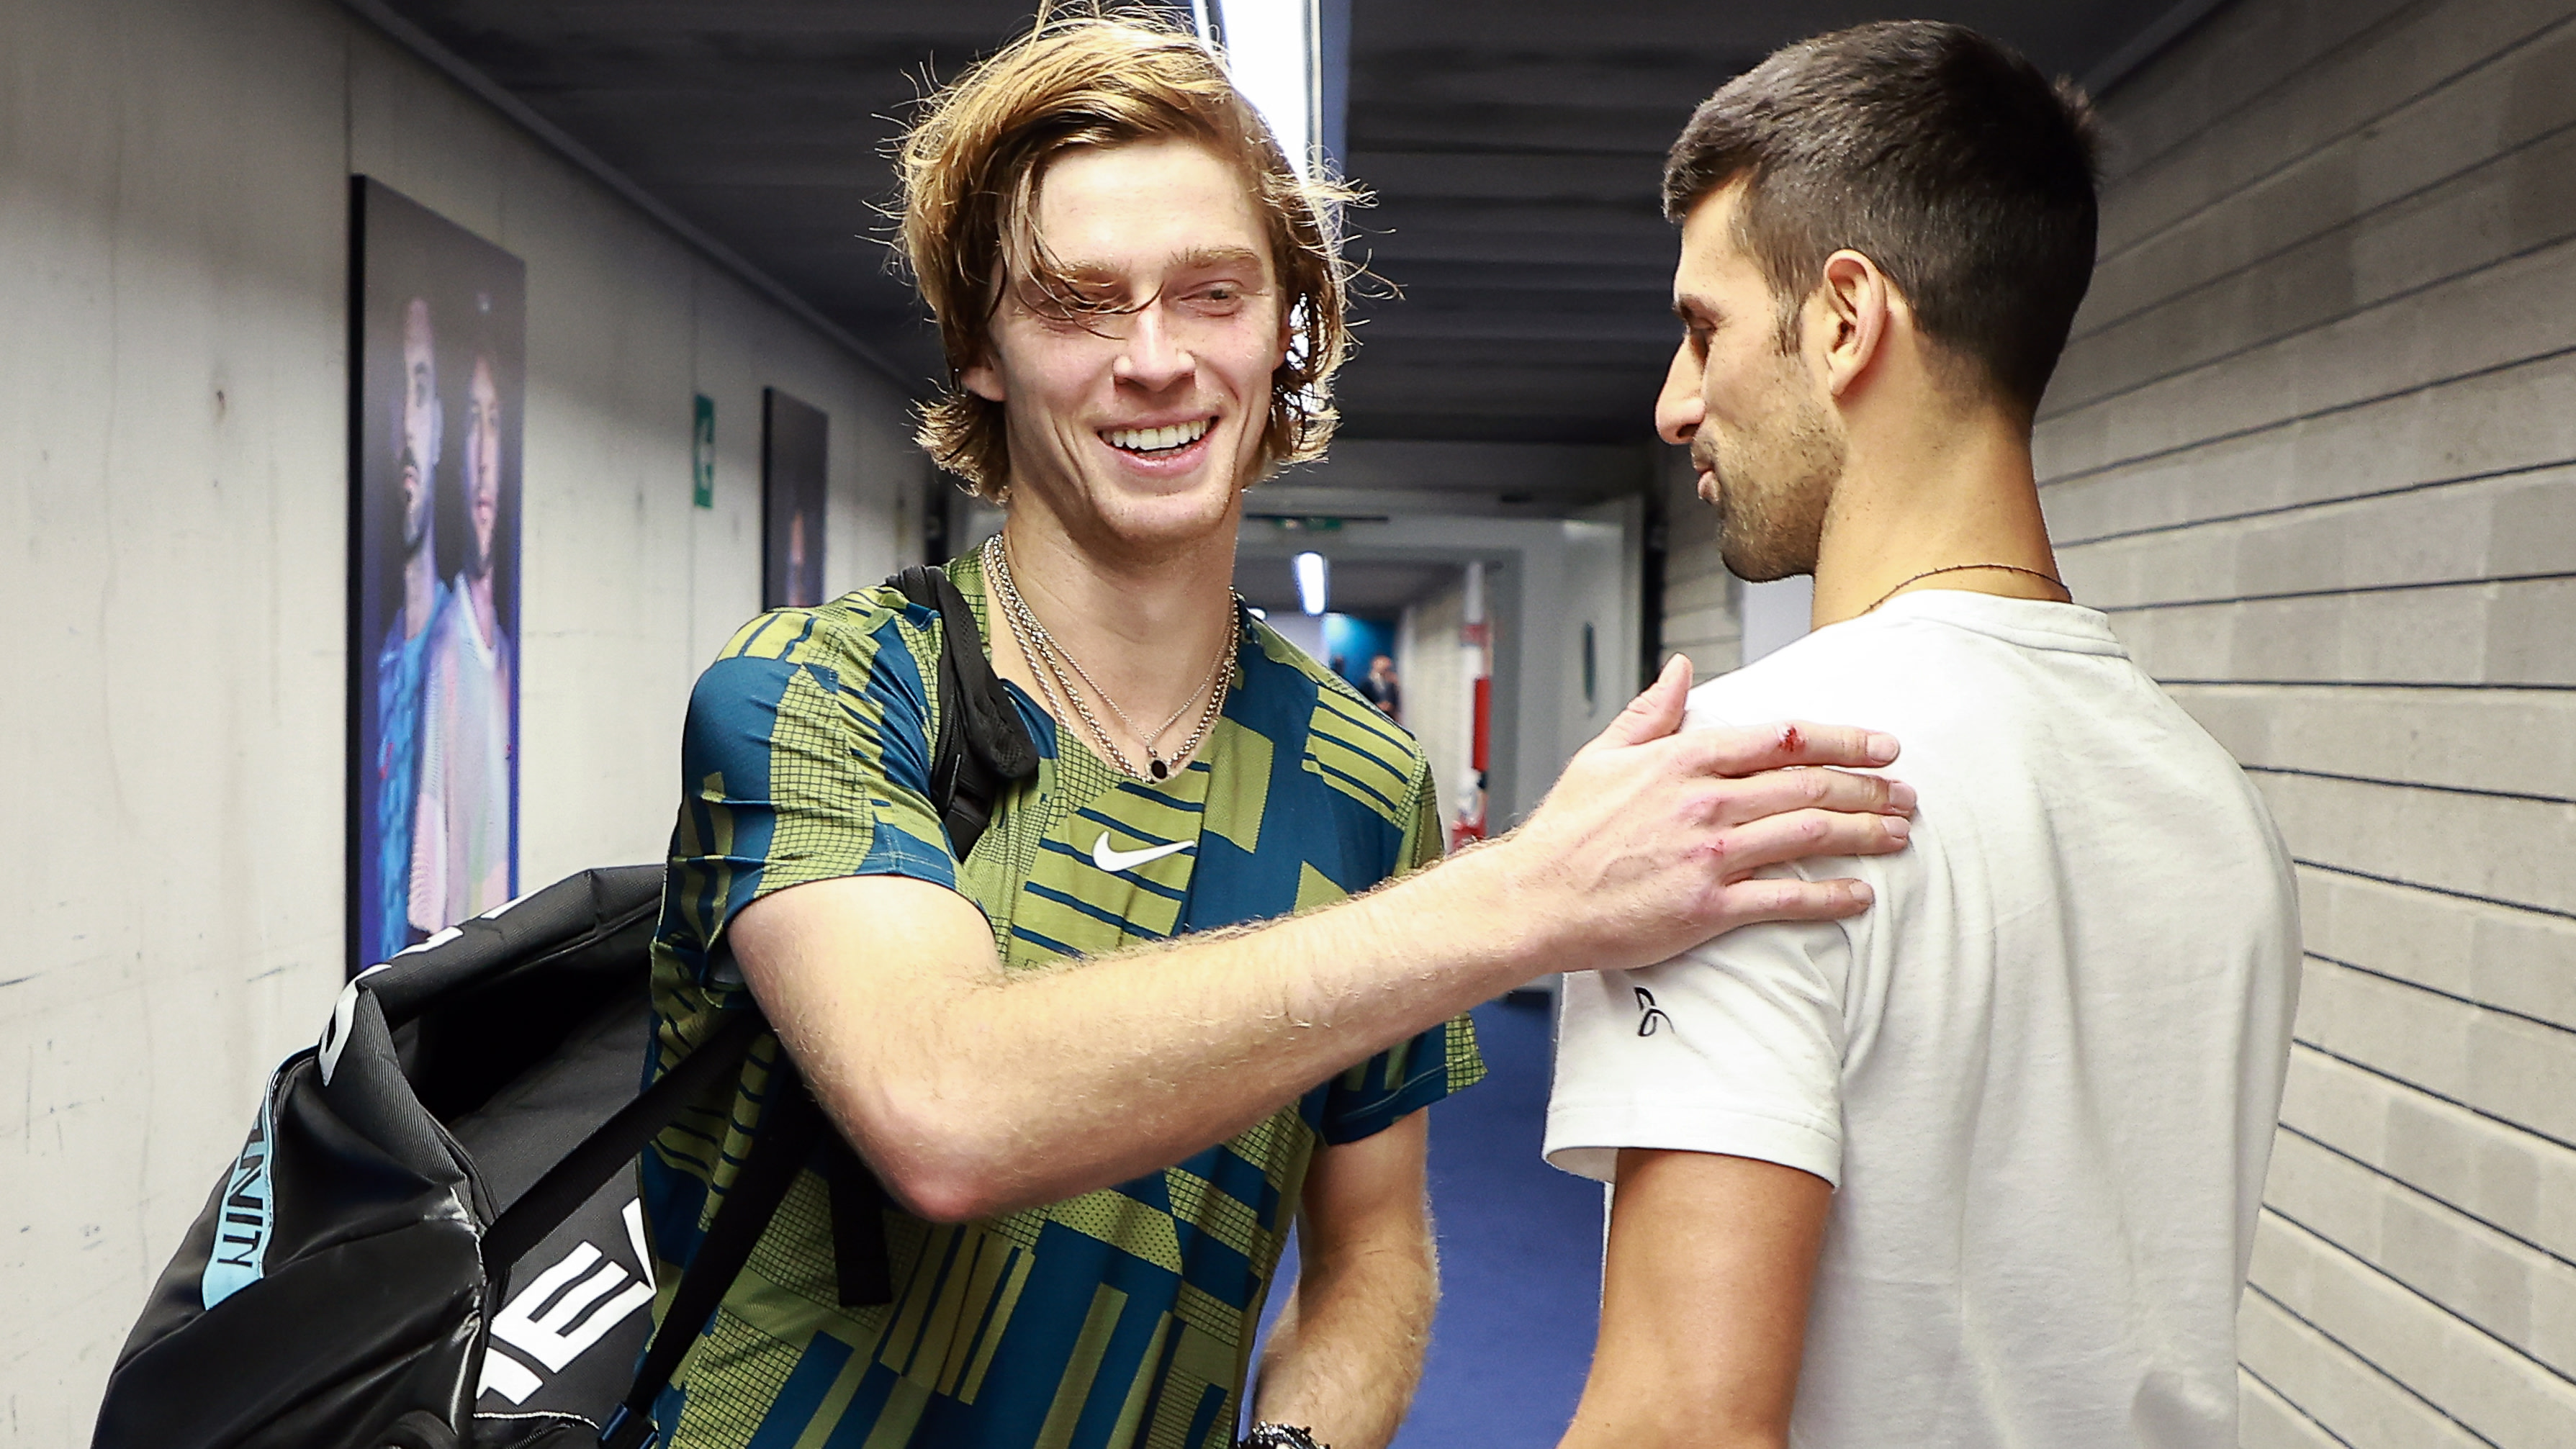 Quote of the Day Novak Djokovic says nice guy Andrey Rublev “scares off his opponents” with on-court intensity